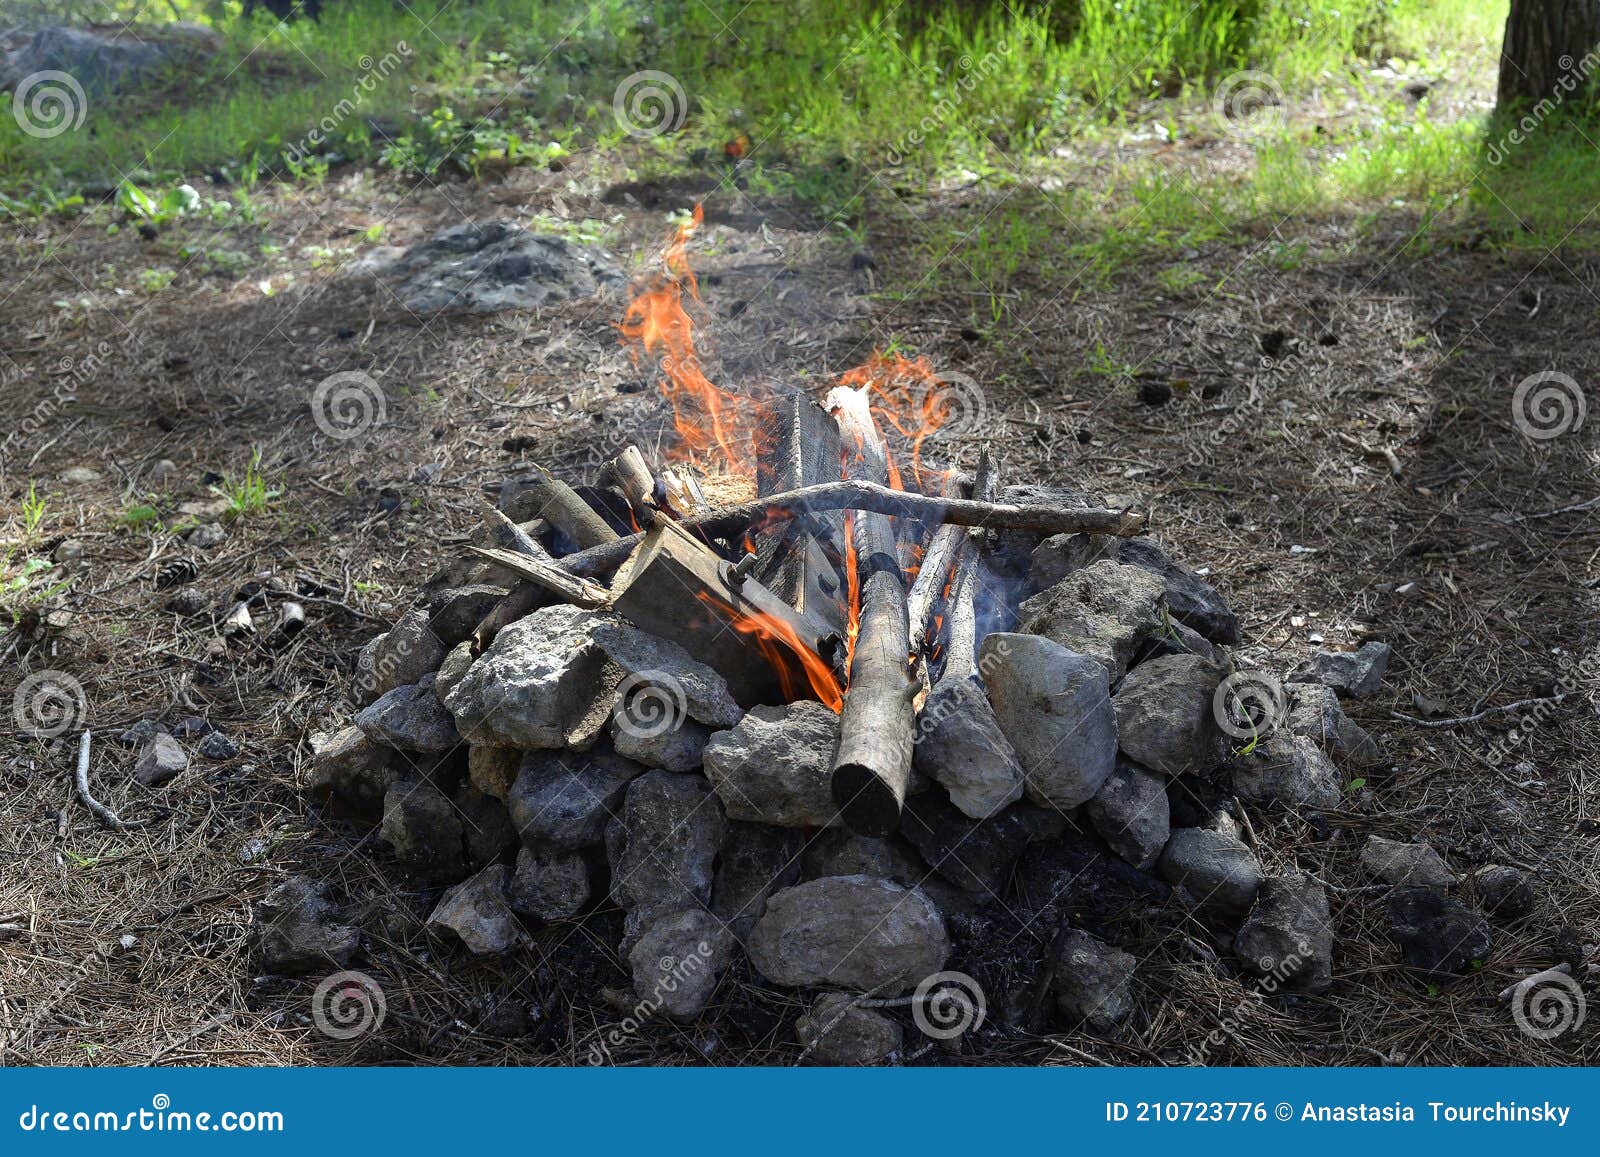 Campsite with Campfire. Gray and Brown Big Stones and Wood for a ...